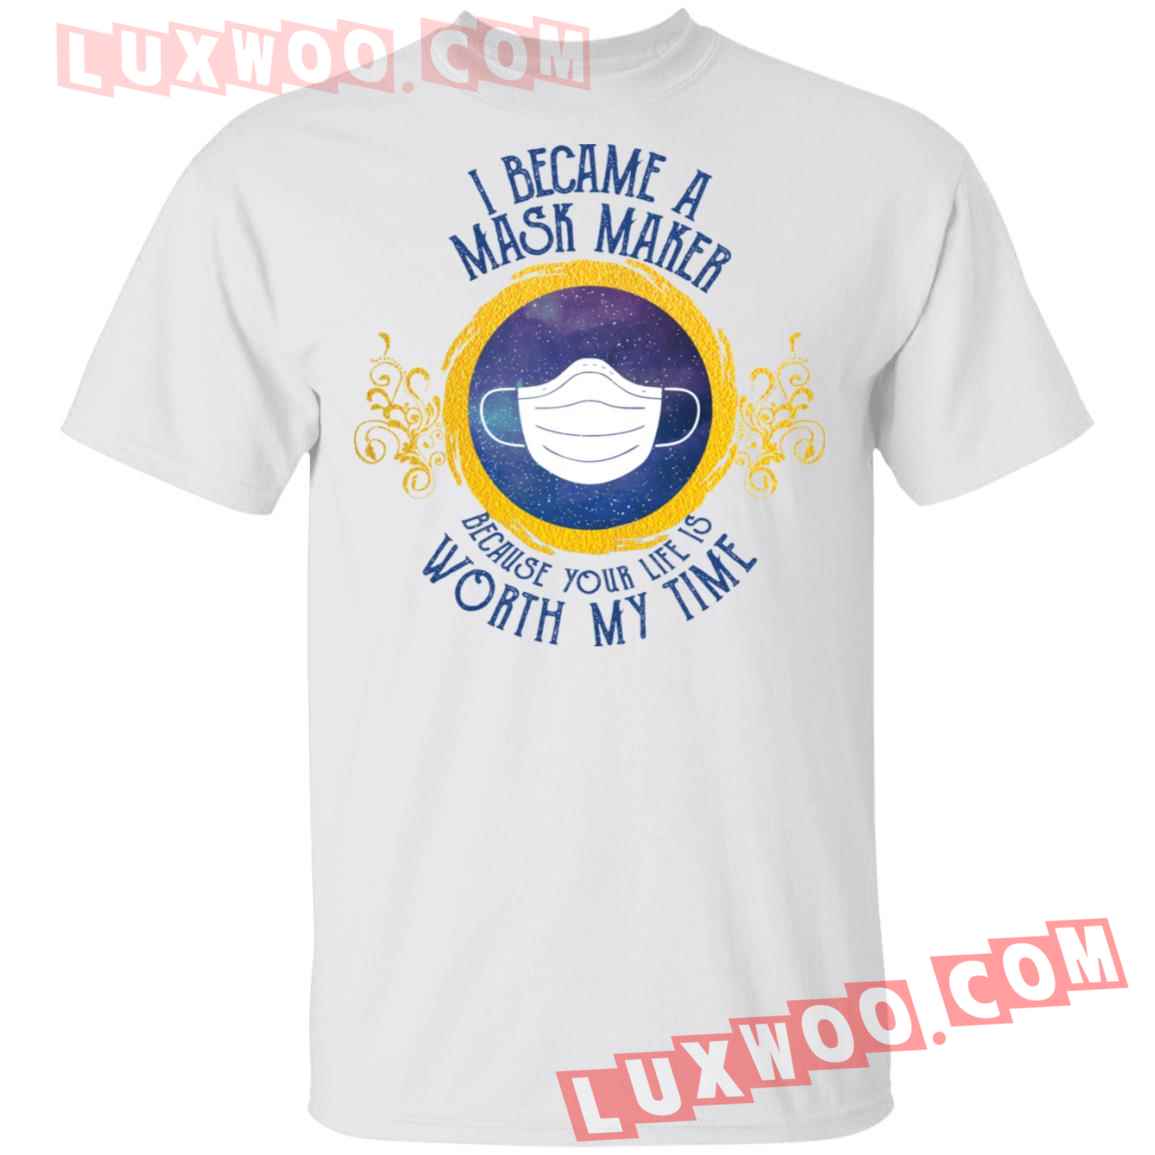 I Became A Msk Maker Because Your Life Is Worth My Time Shirt